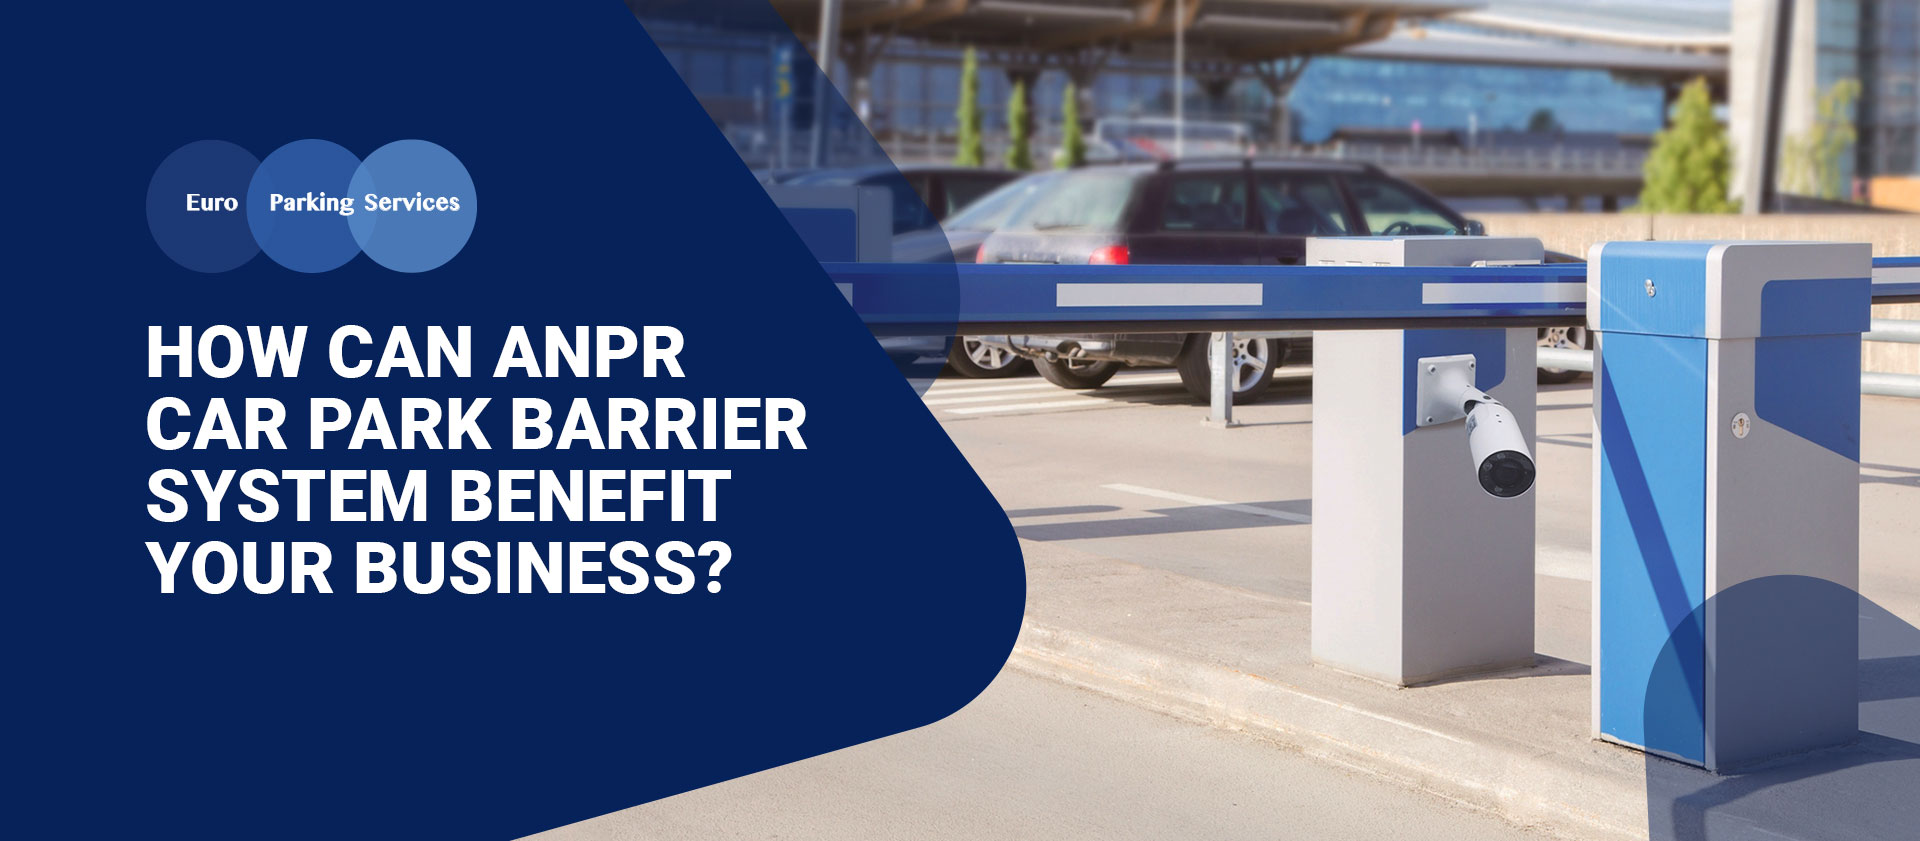 How Can ANPR Car Park Barrier System Benefit Your Business Euro Parking Services